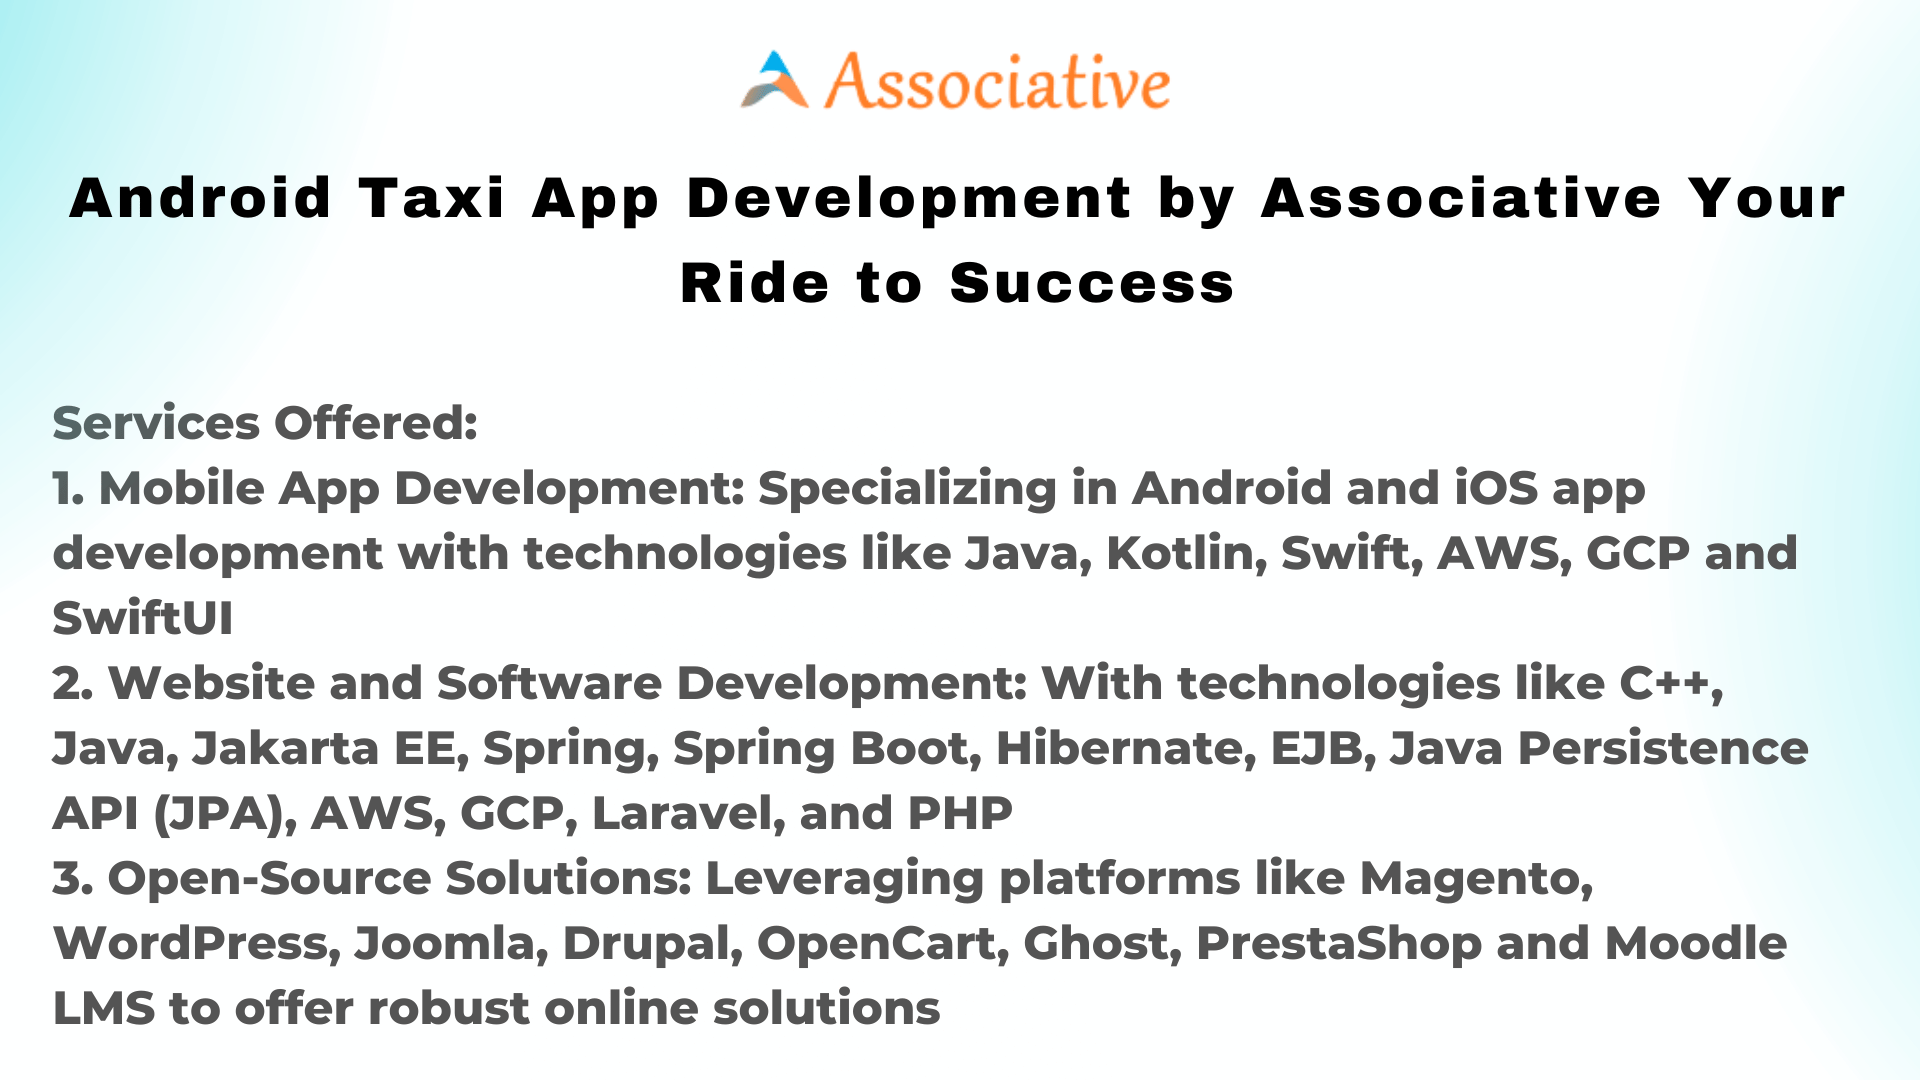 Android Taxi App Development by Associative Your Ride to Success